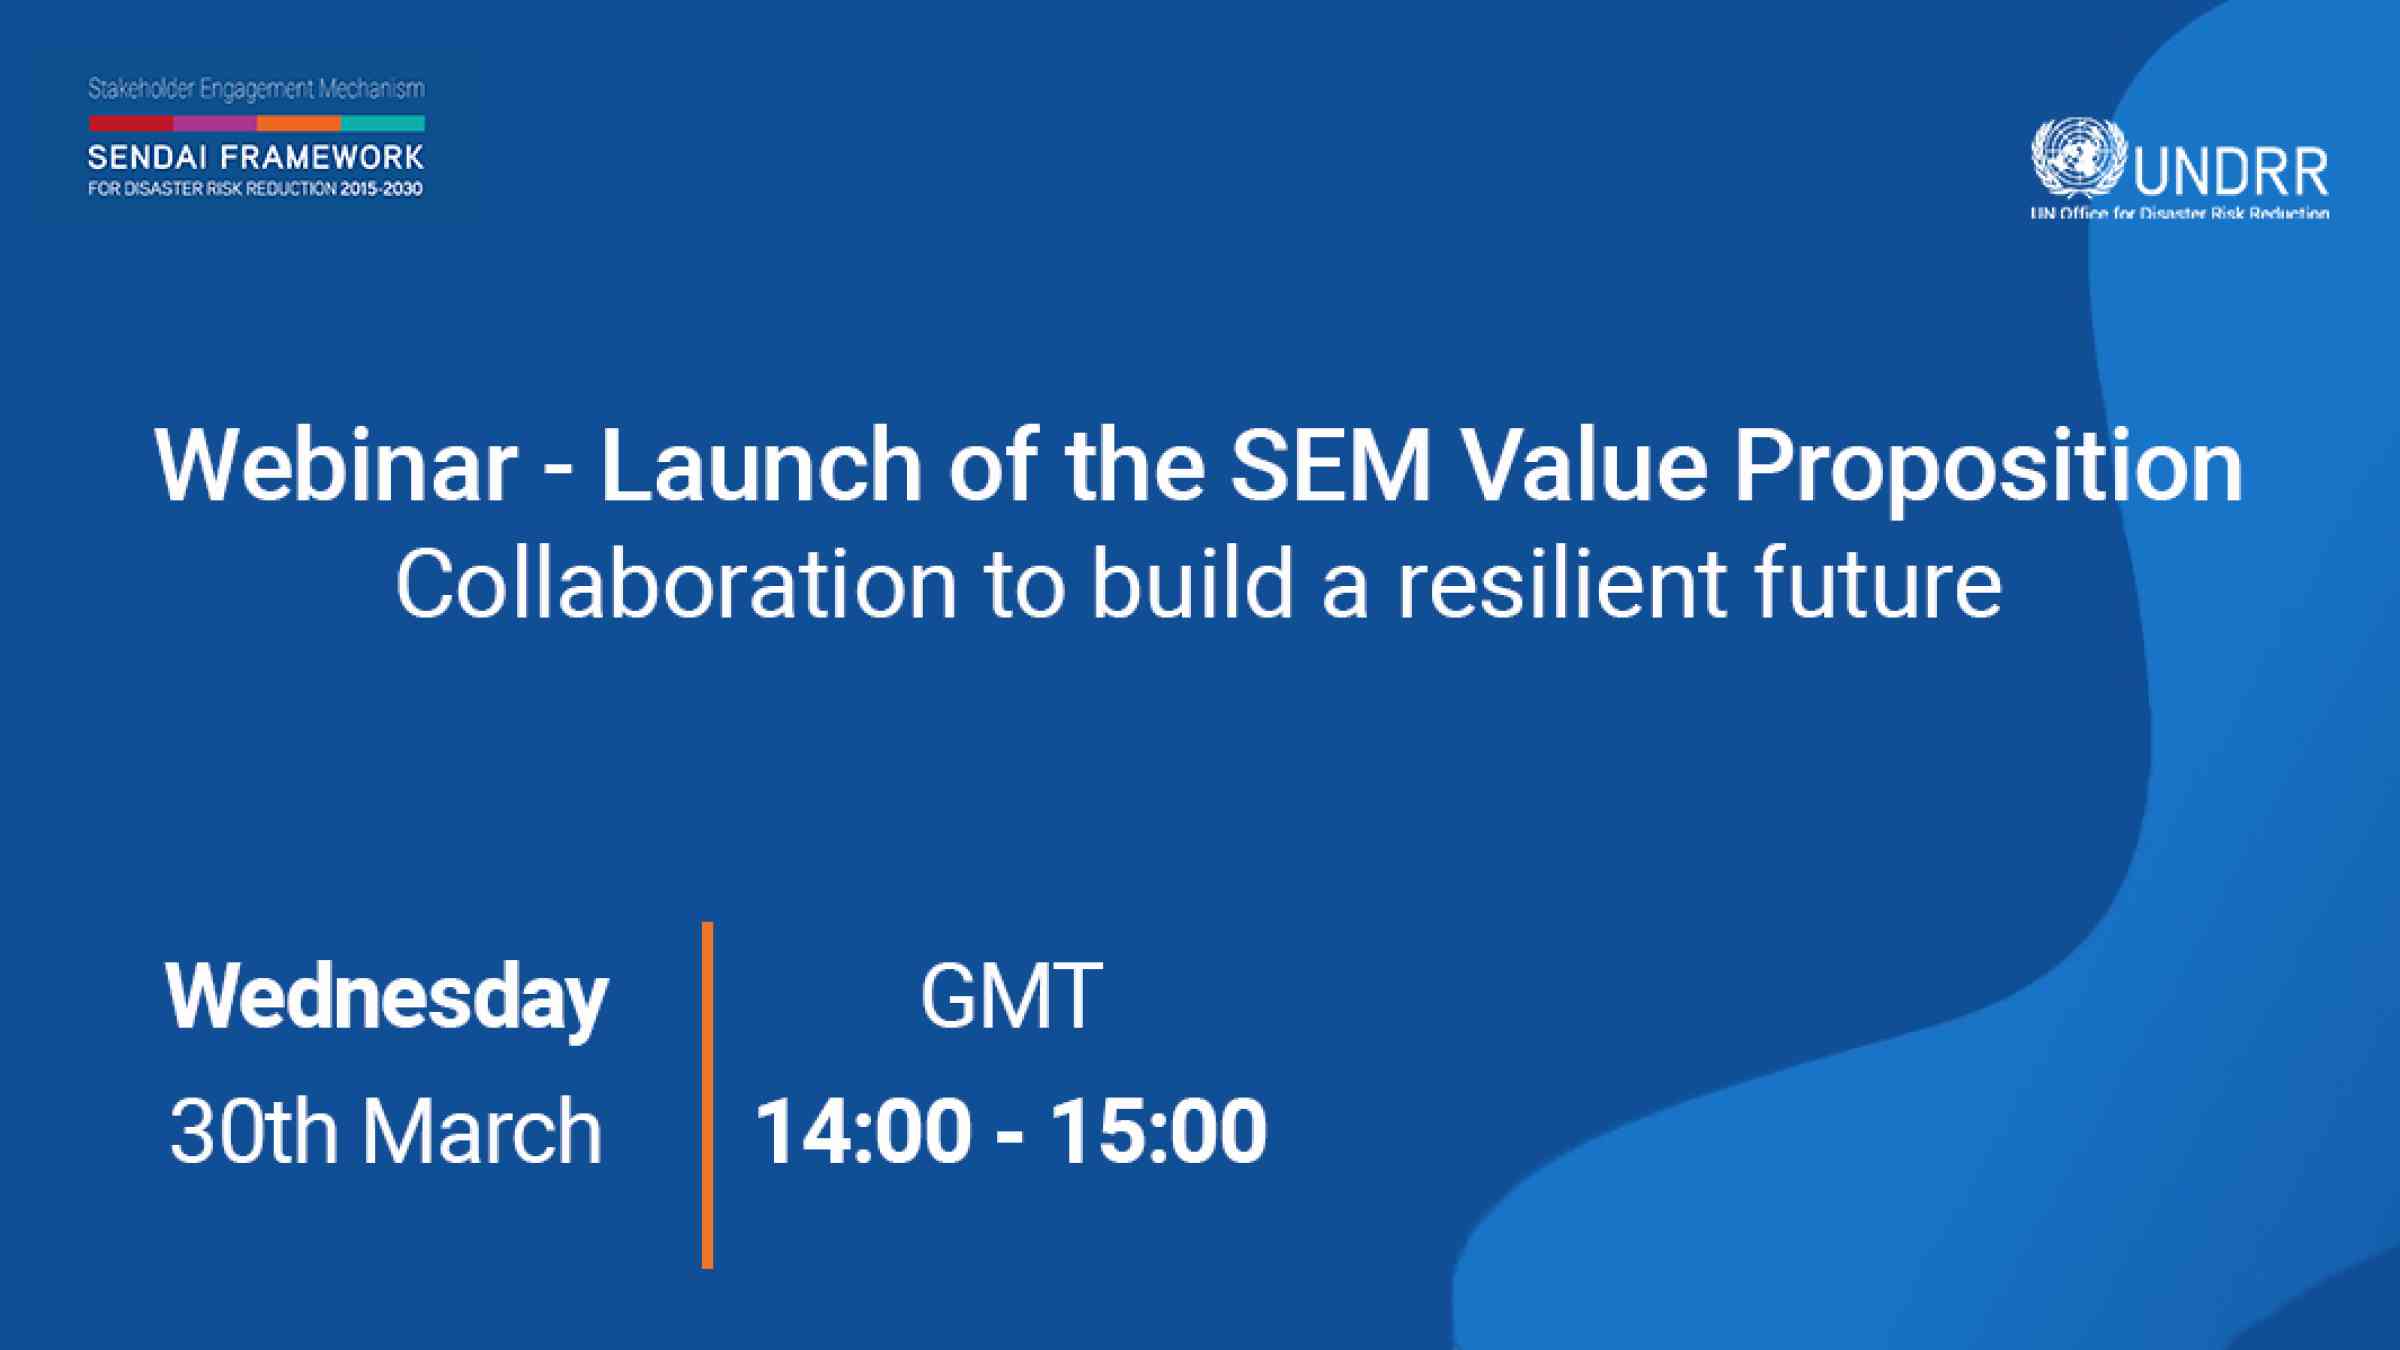 Webinar - Launching of the SEM Value Proposition